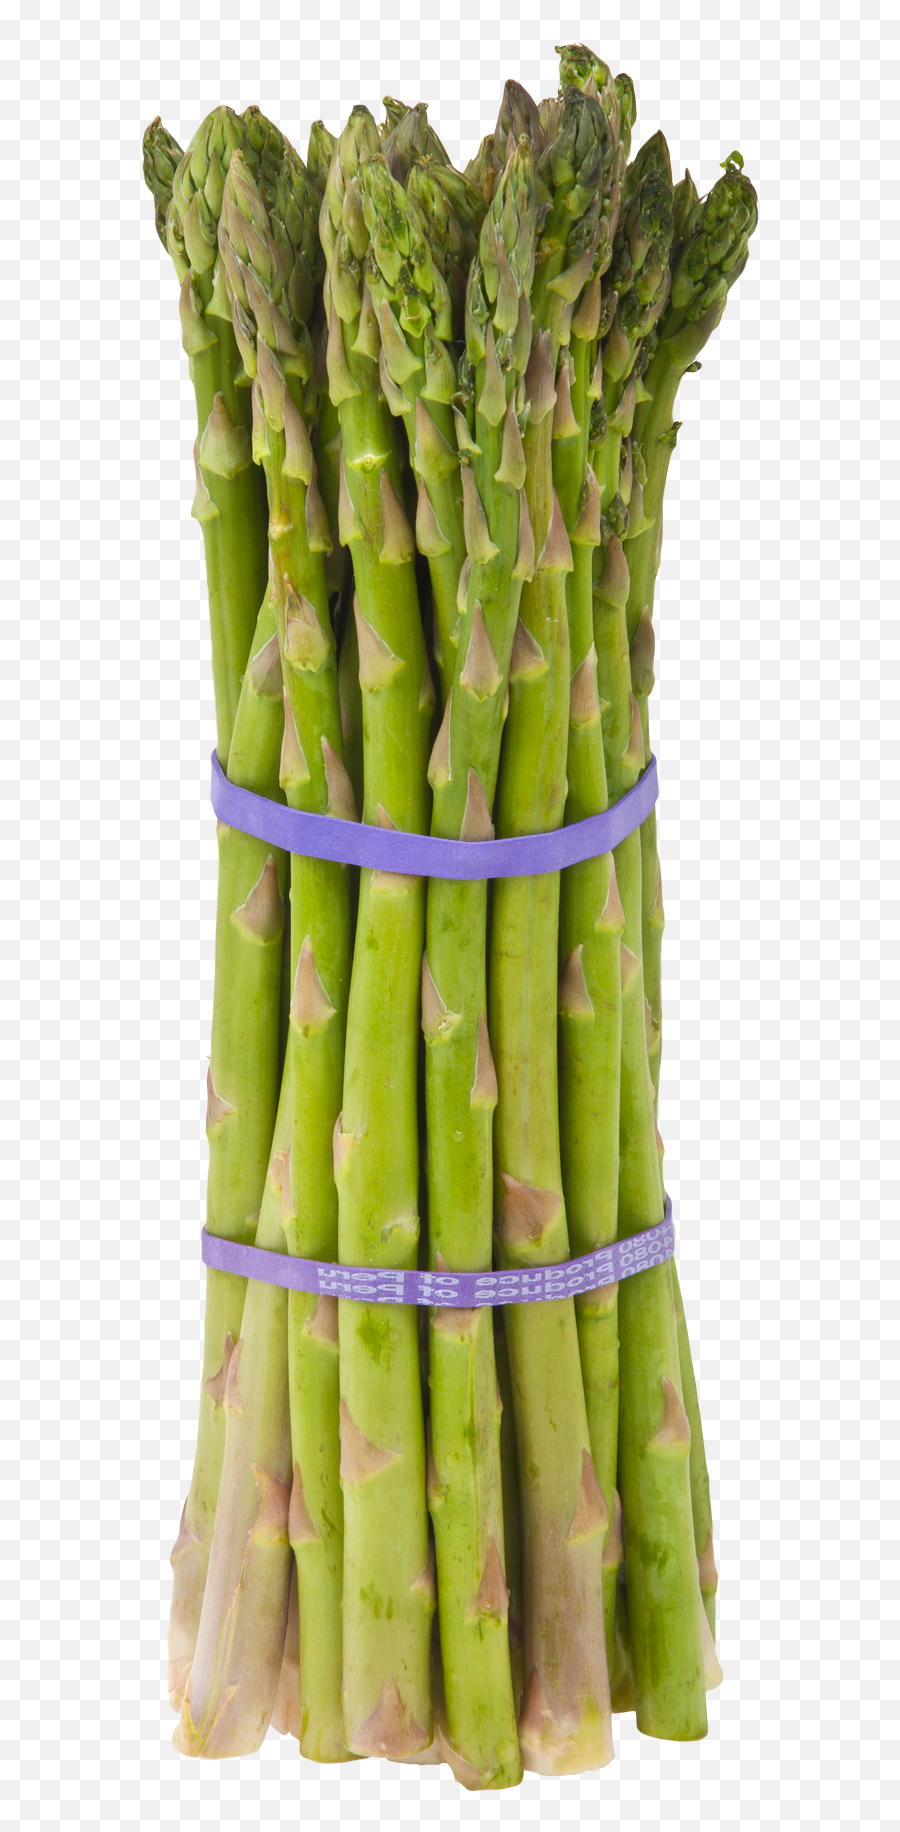 Download Asparagus Png Image For Free - Asparagus Meaning In Bengali,Sugarcane Png